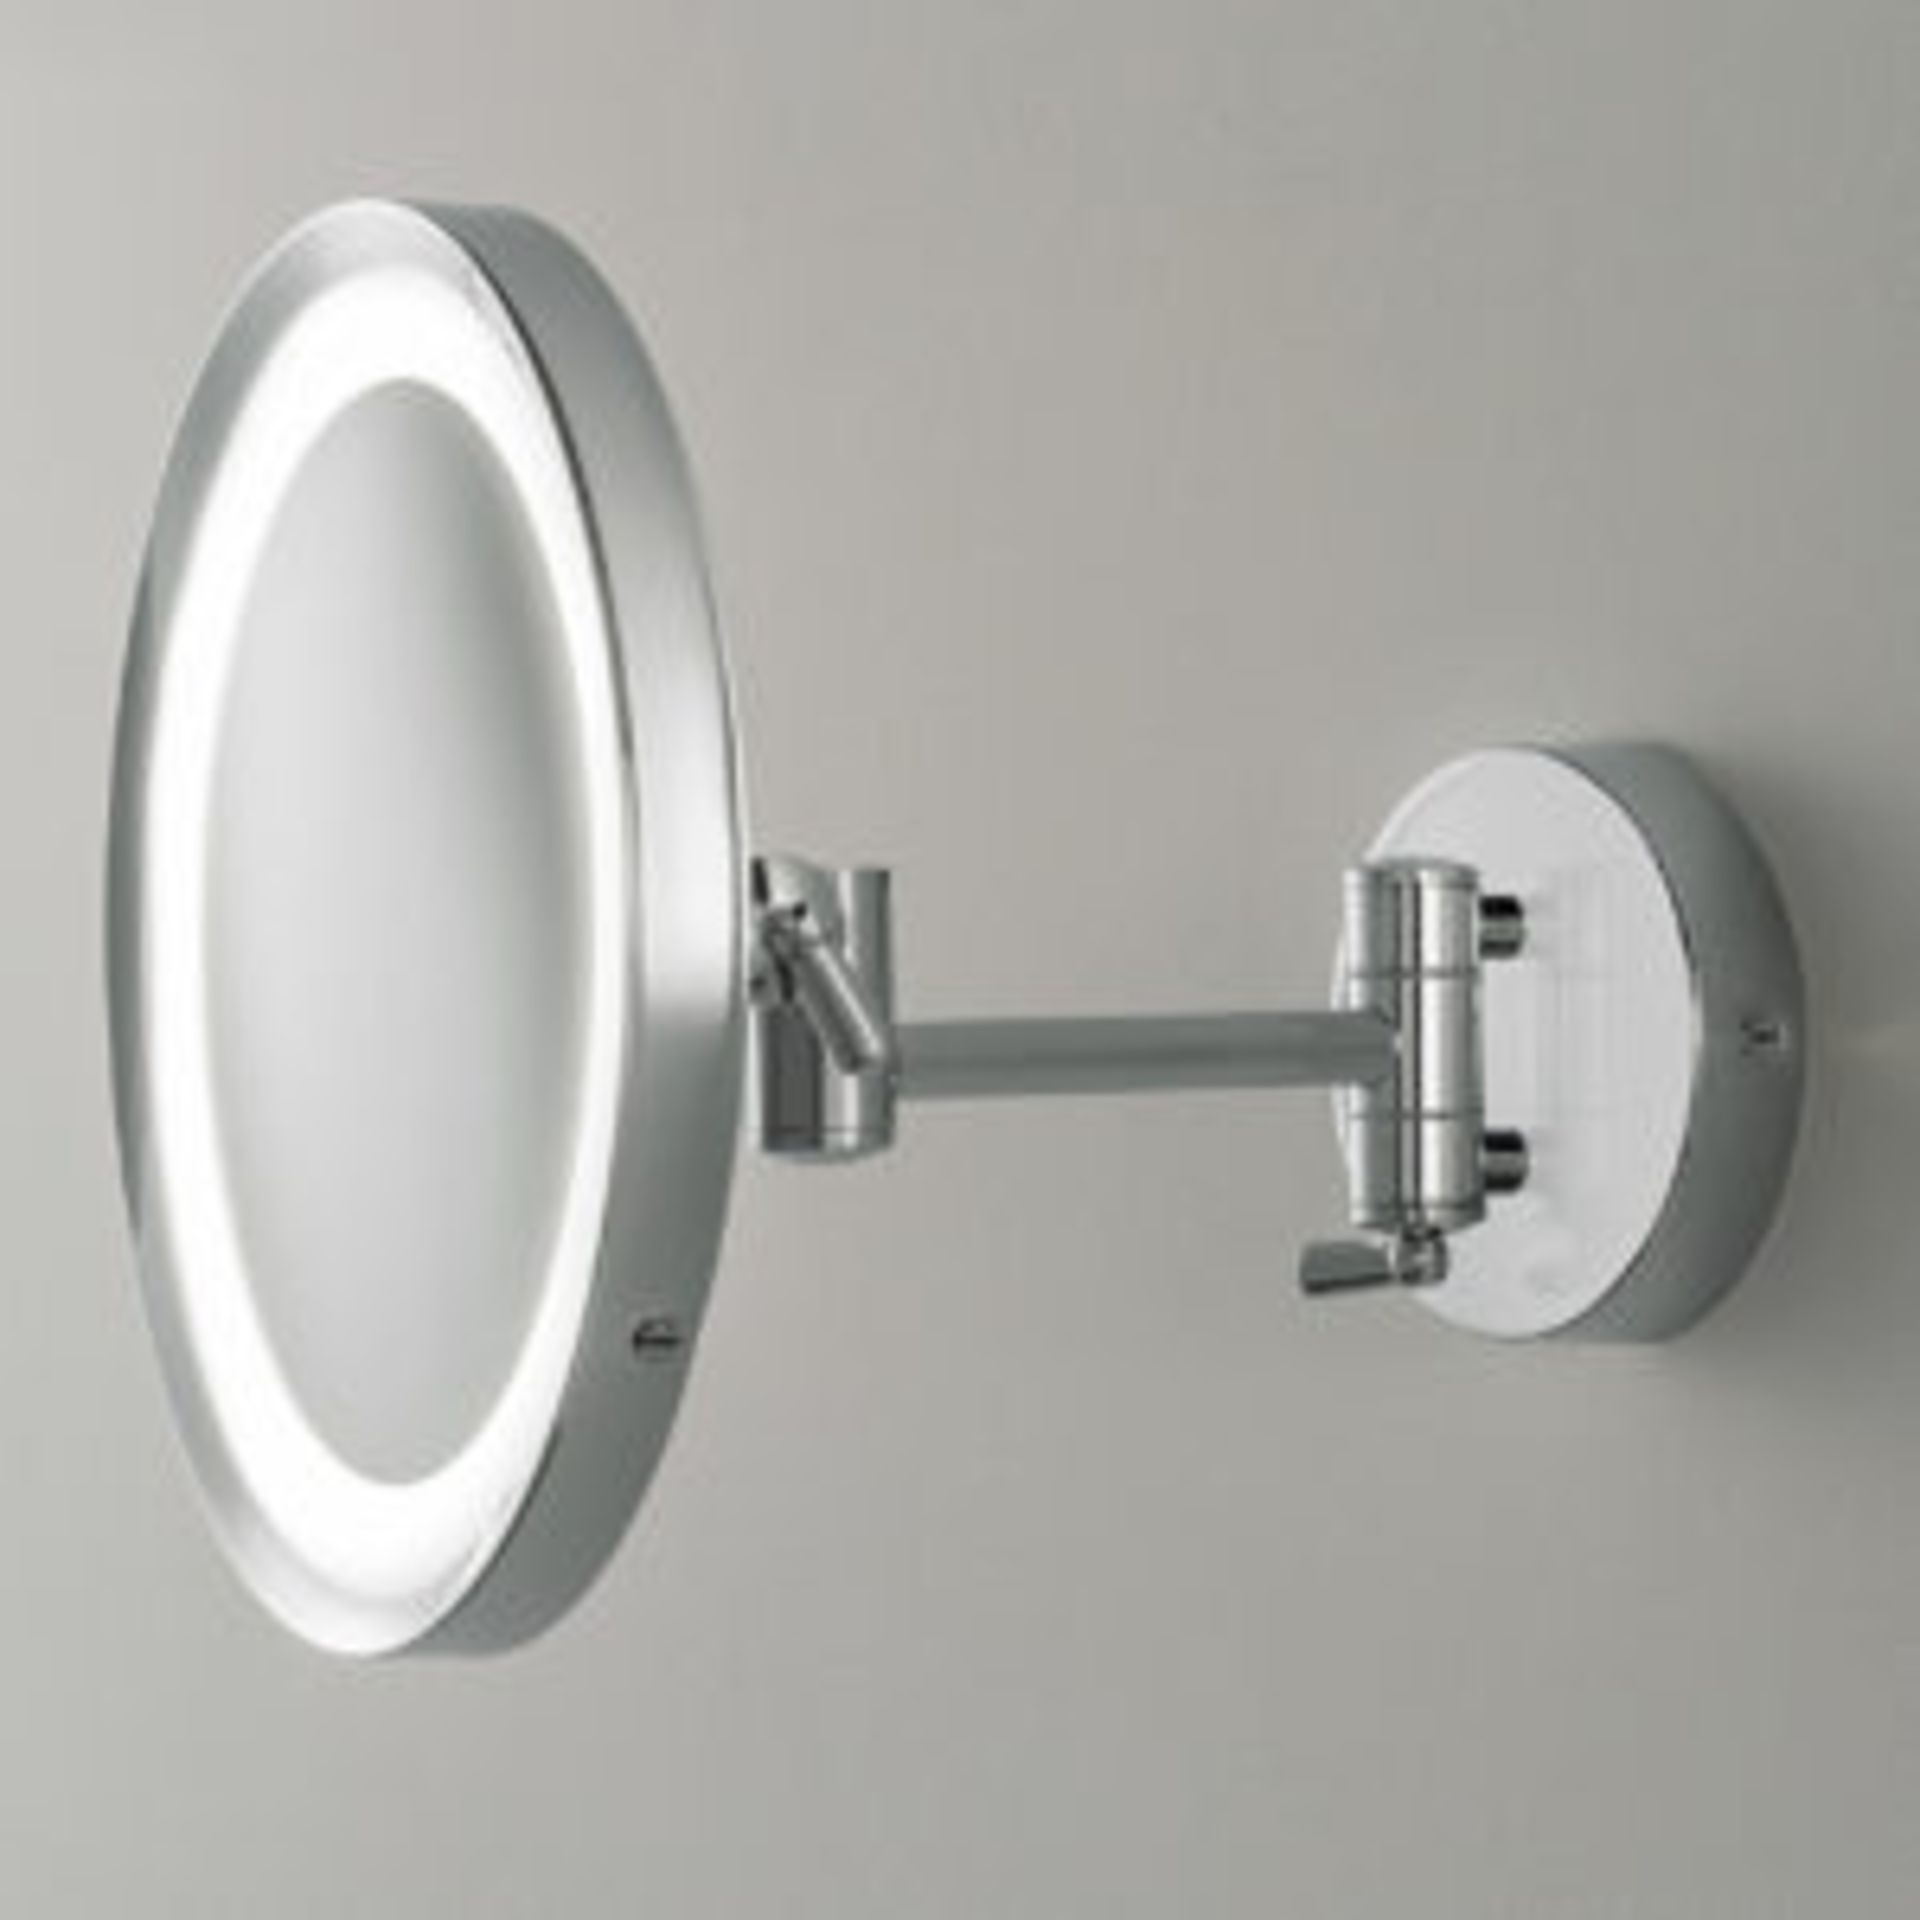 2 x Chelsom Bathroom Shaving/Beauty Magnifying Mirrors - His and Hers Bathroom Mirrors - Fully